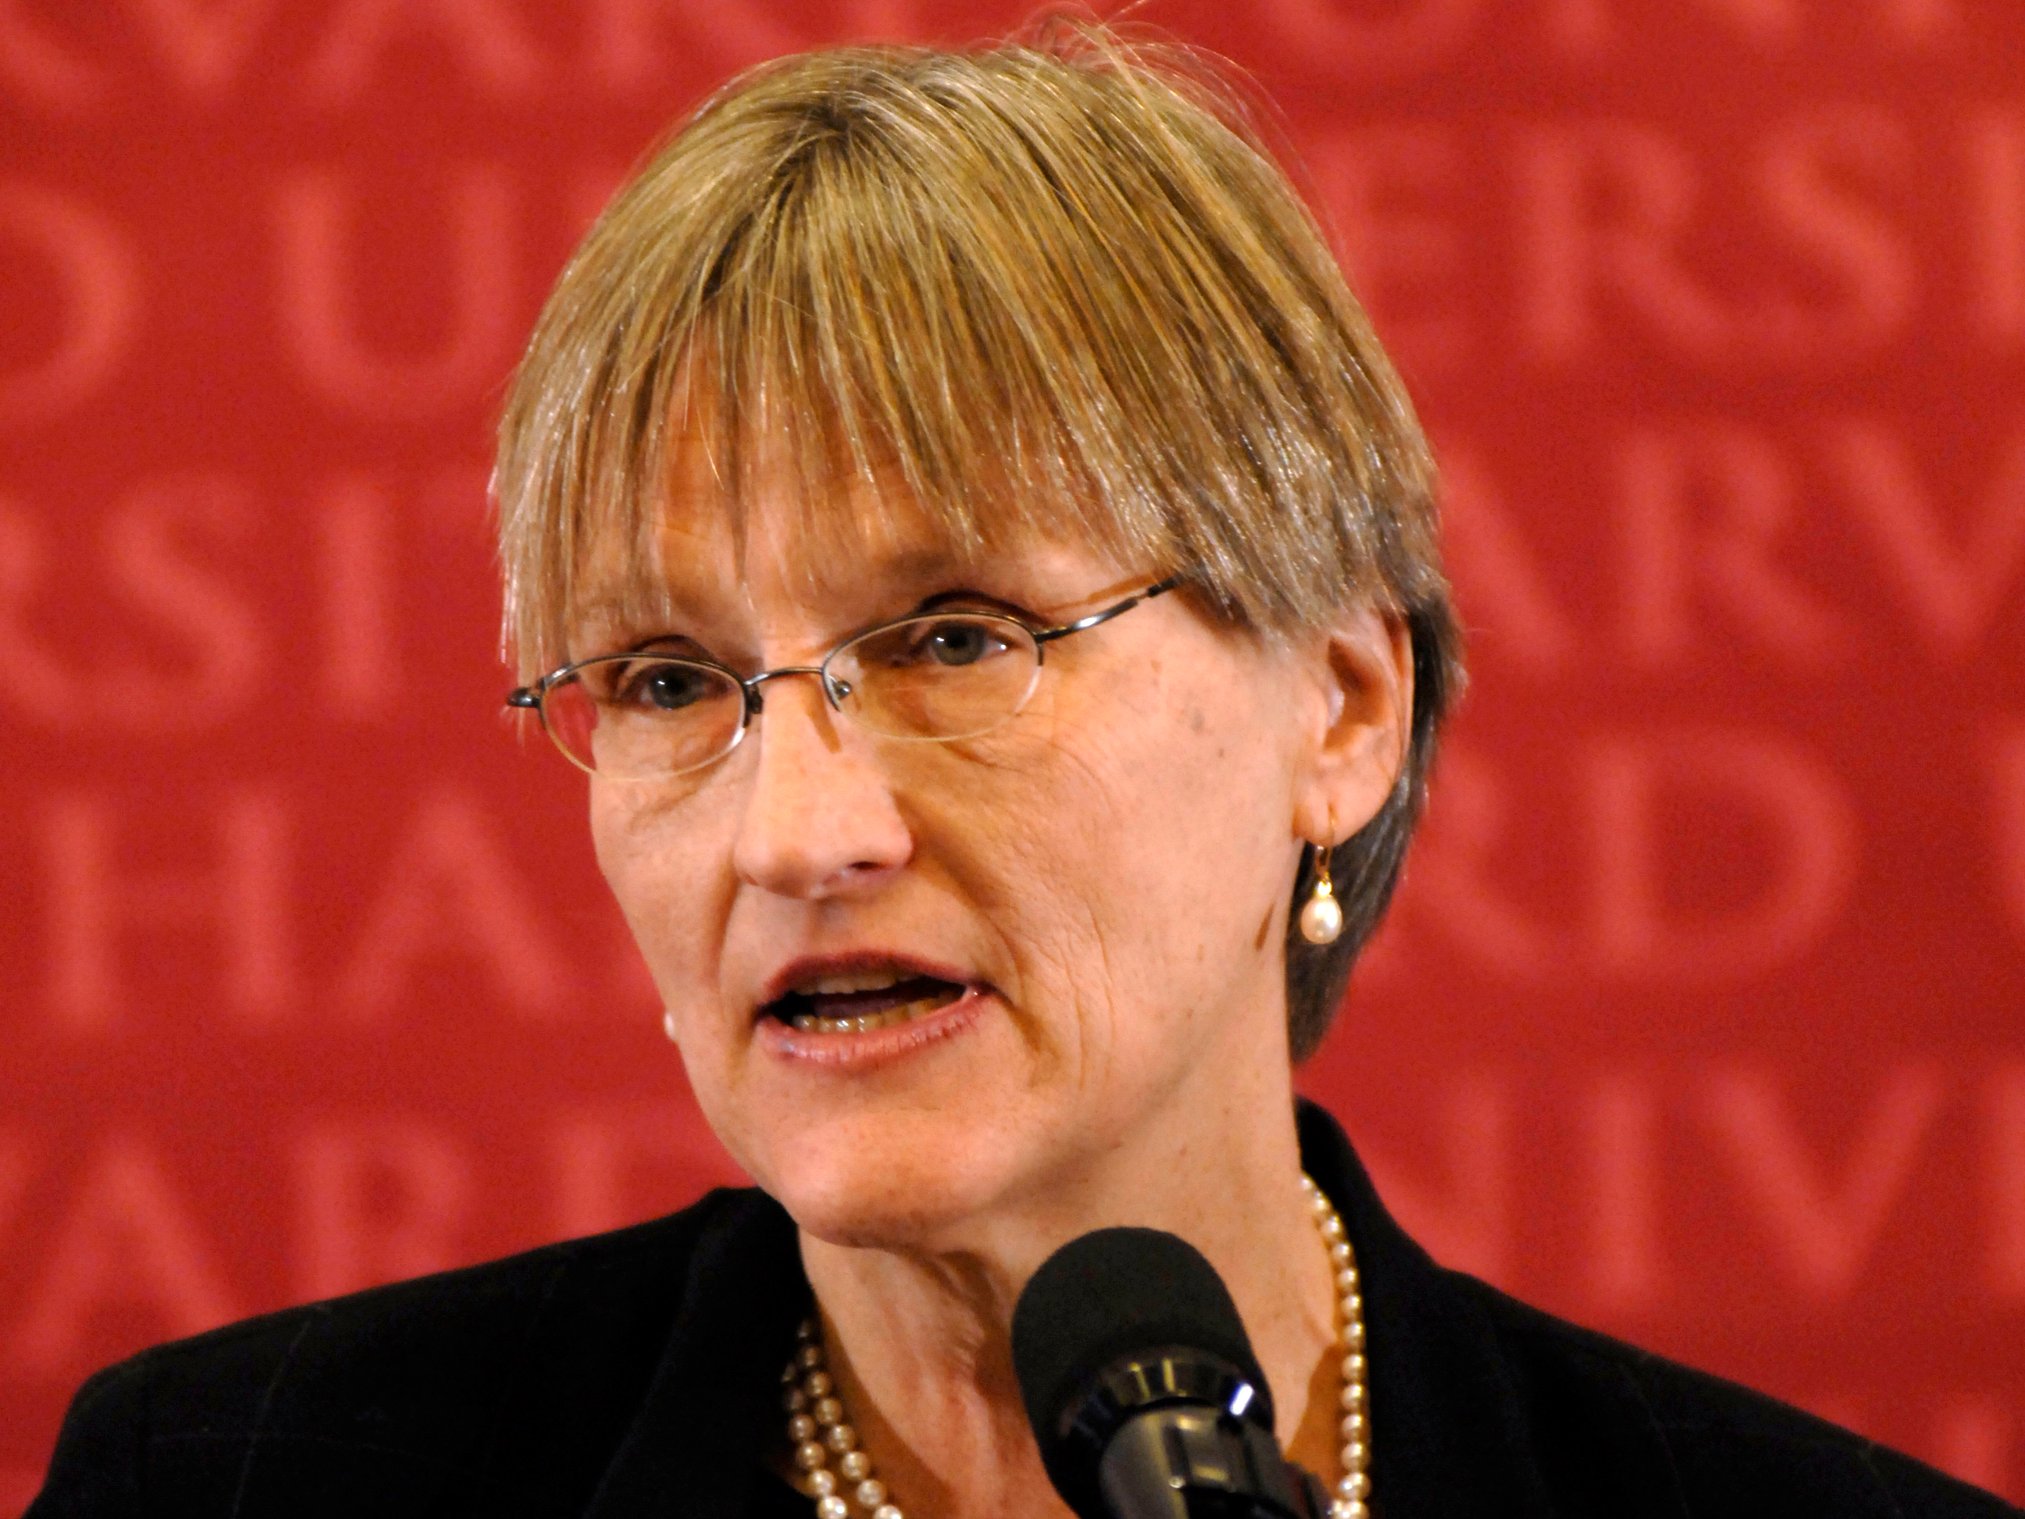 Historian Drew Gilpin Faust speaks at Harvard University in the Thompson Room of the Barker Center as she is named President of Harvard February 11, 2007 in Cambridge, Massachusetts. Harvard appointed Faust as the first woman to lead the oldest college in the U.S. as campuses nationwide struggle with a shortage of female faculty members.